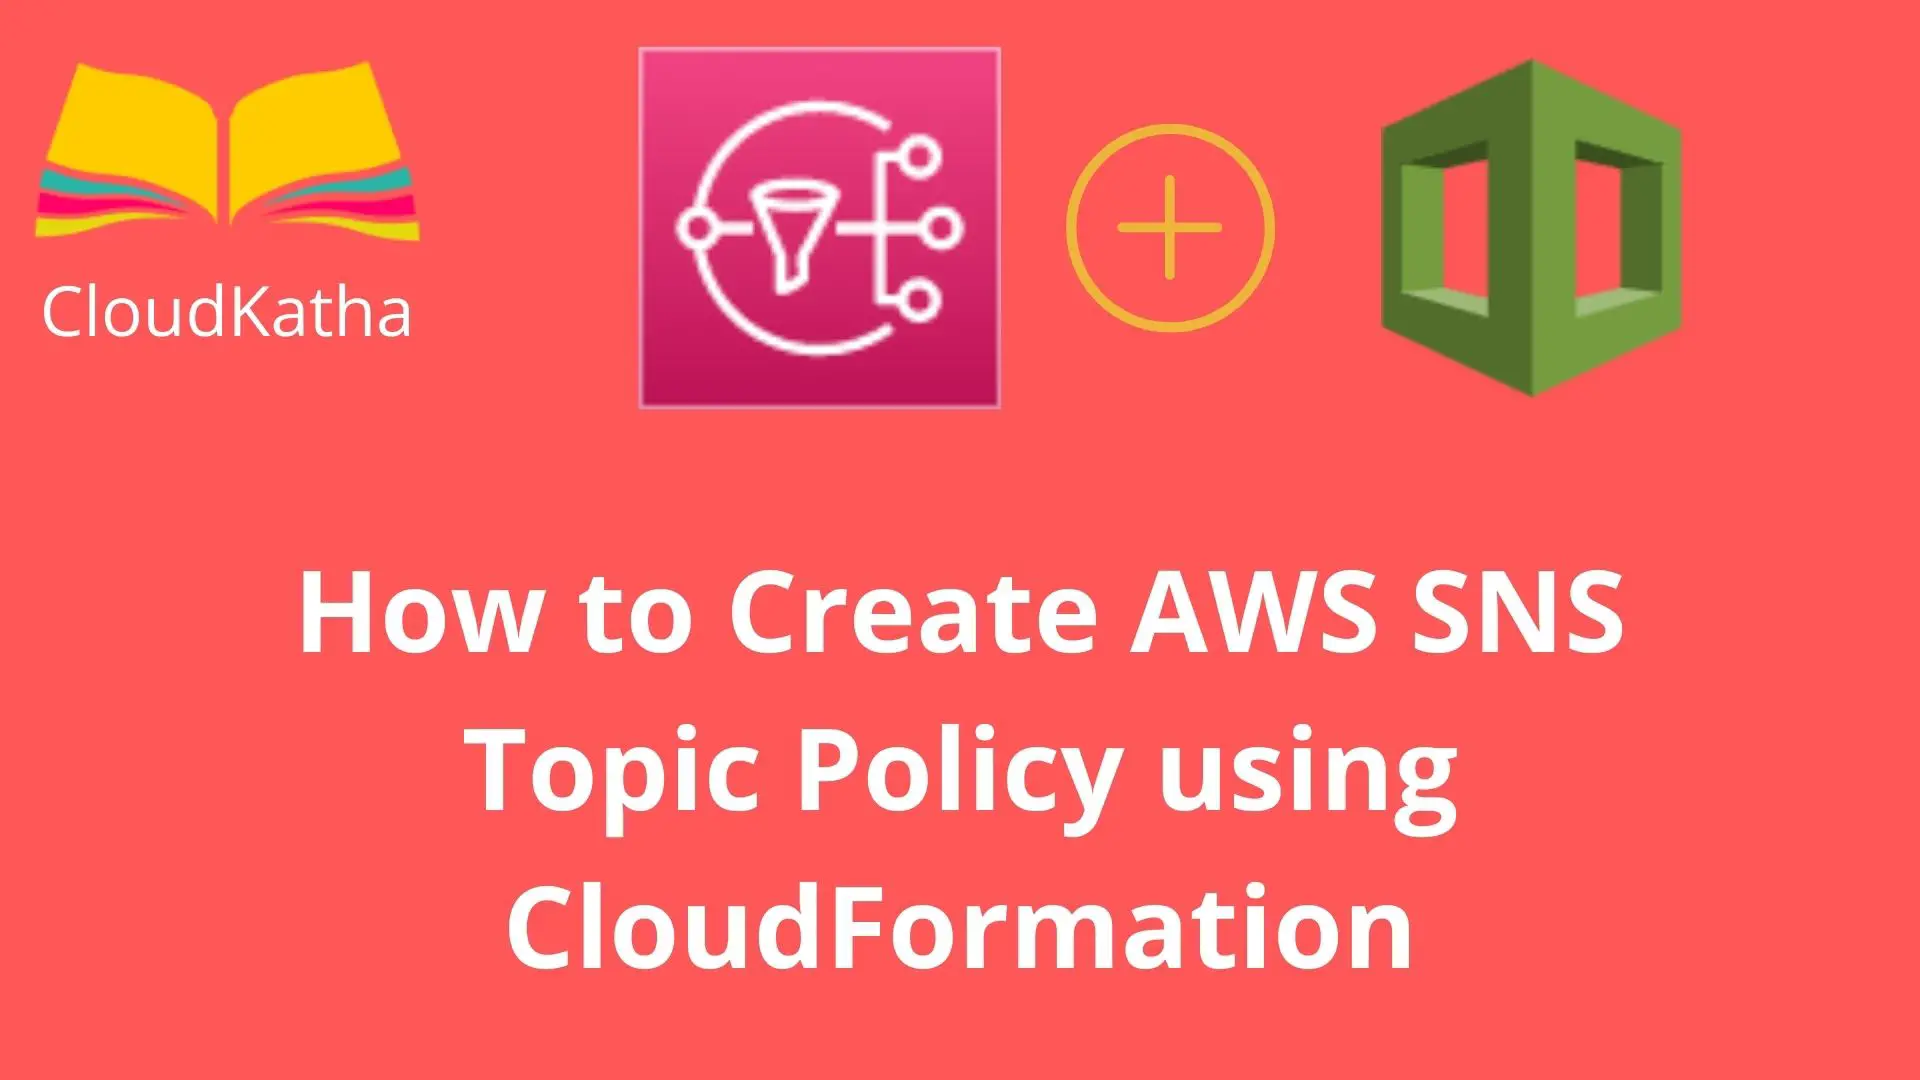 How to Create AWS SNS Topic Policy using CloudFormation